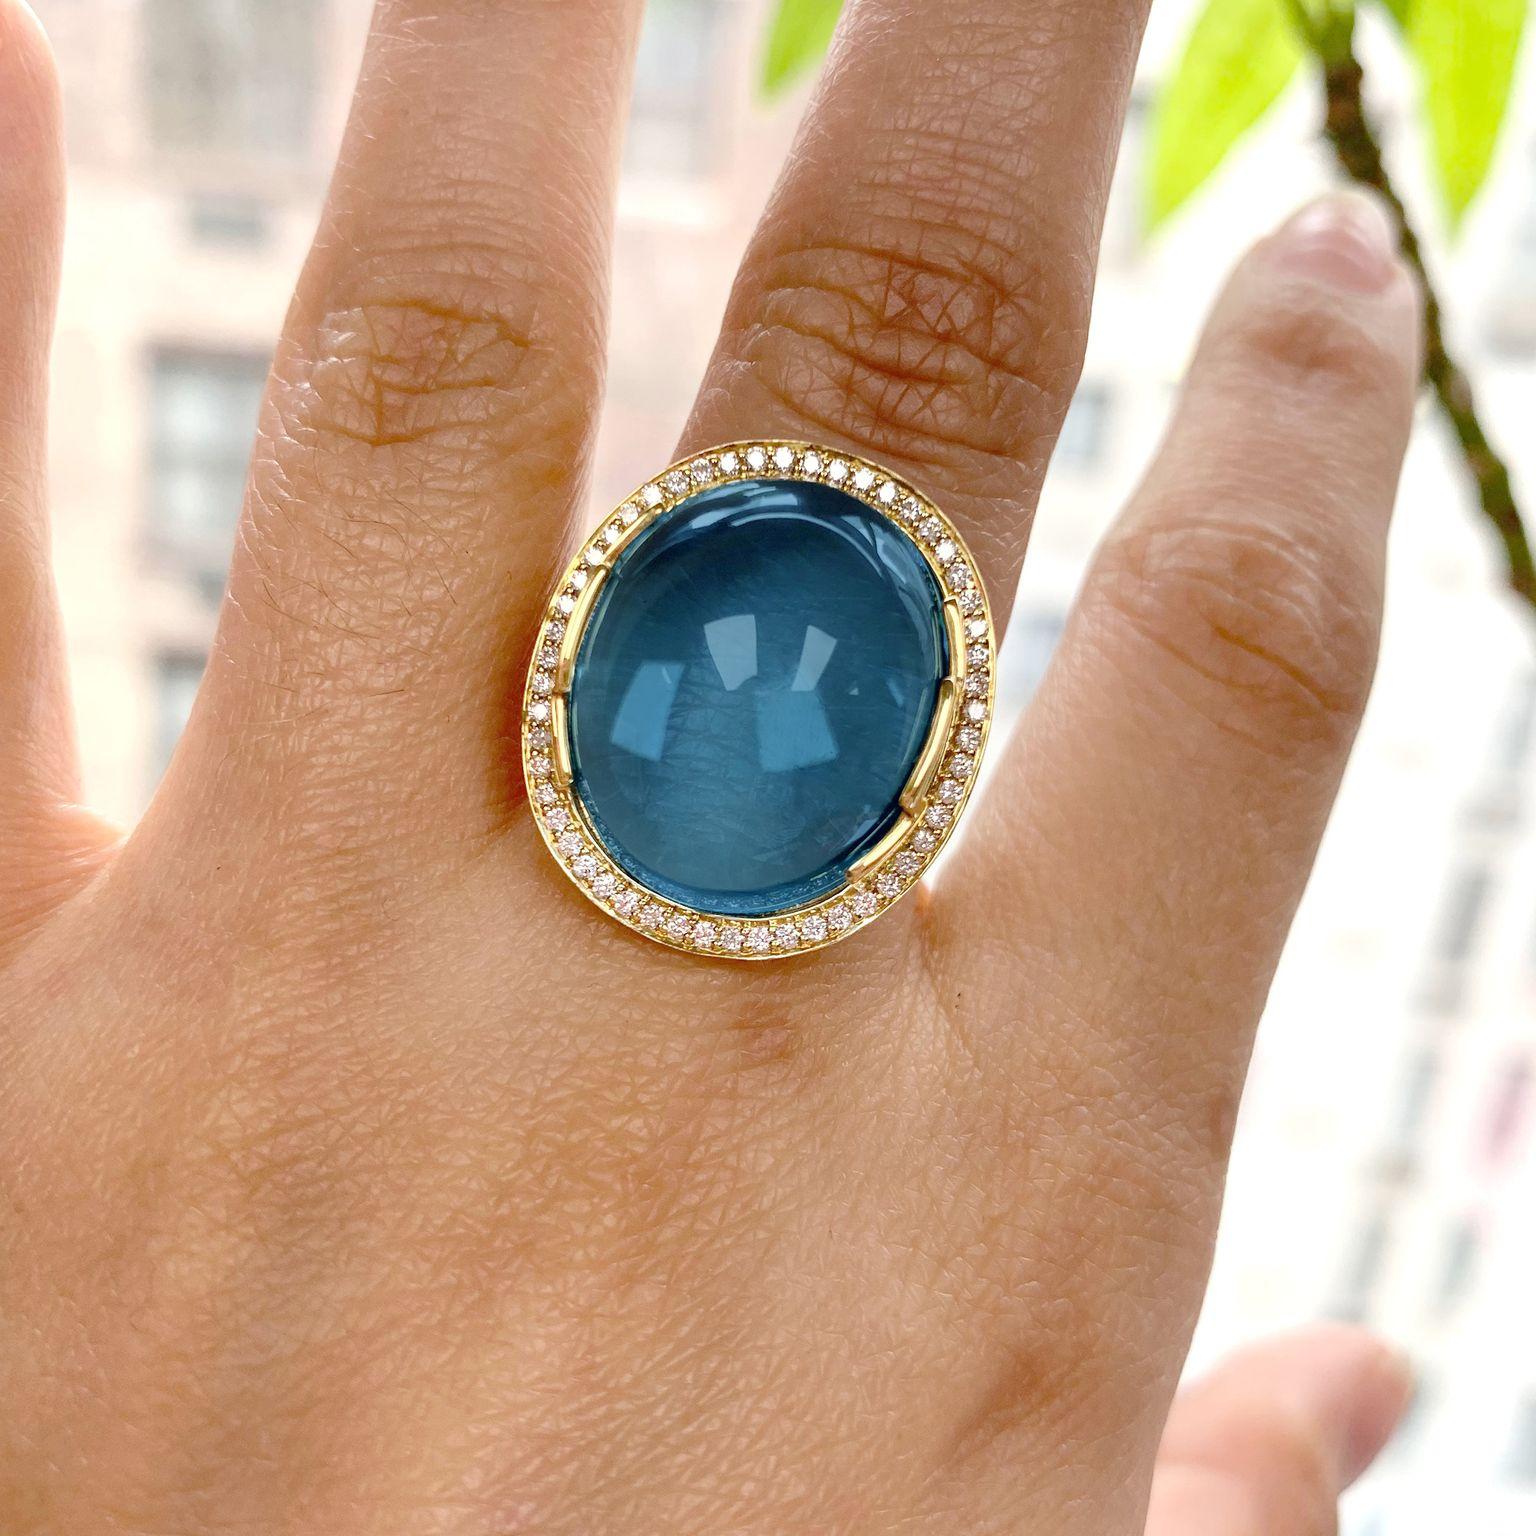 London Blue Topaz Oval Cabochon Ring with Diamonds in 18K Yellow Gold, from 'Rock 'N Roll' Collection. Extensive collection of big and bold pieces. Like the music, this Rock ‘n Roll collection is electric in color and very stimulating to the eye.